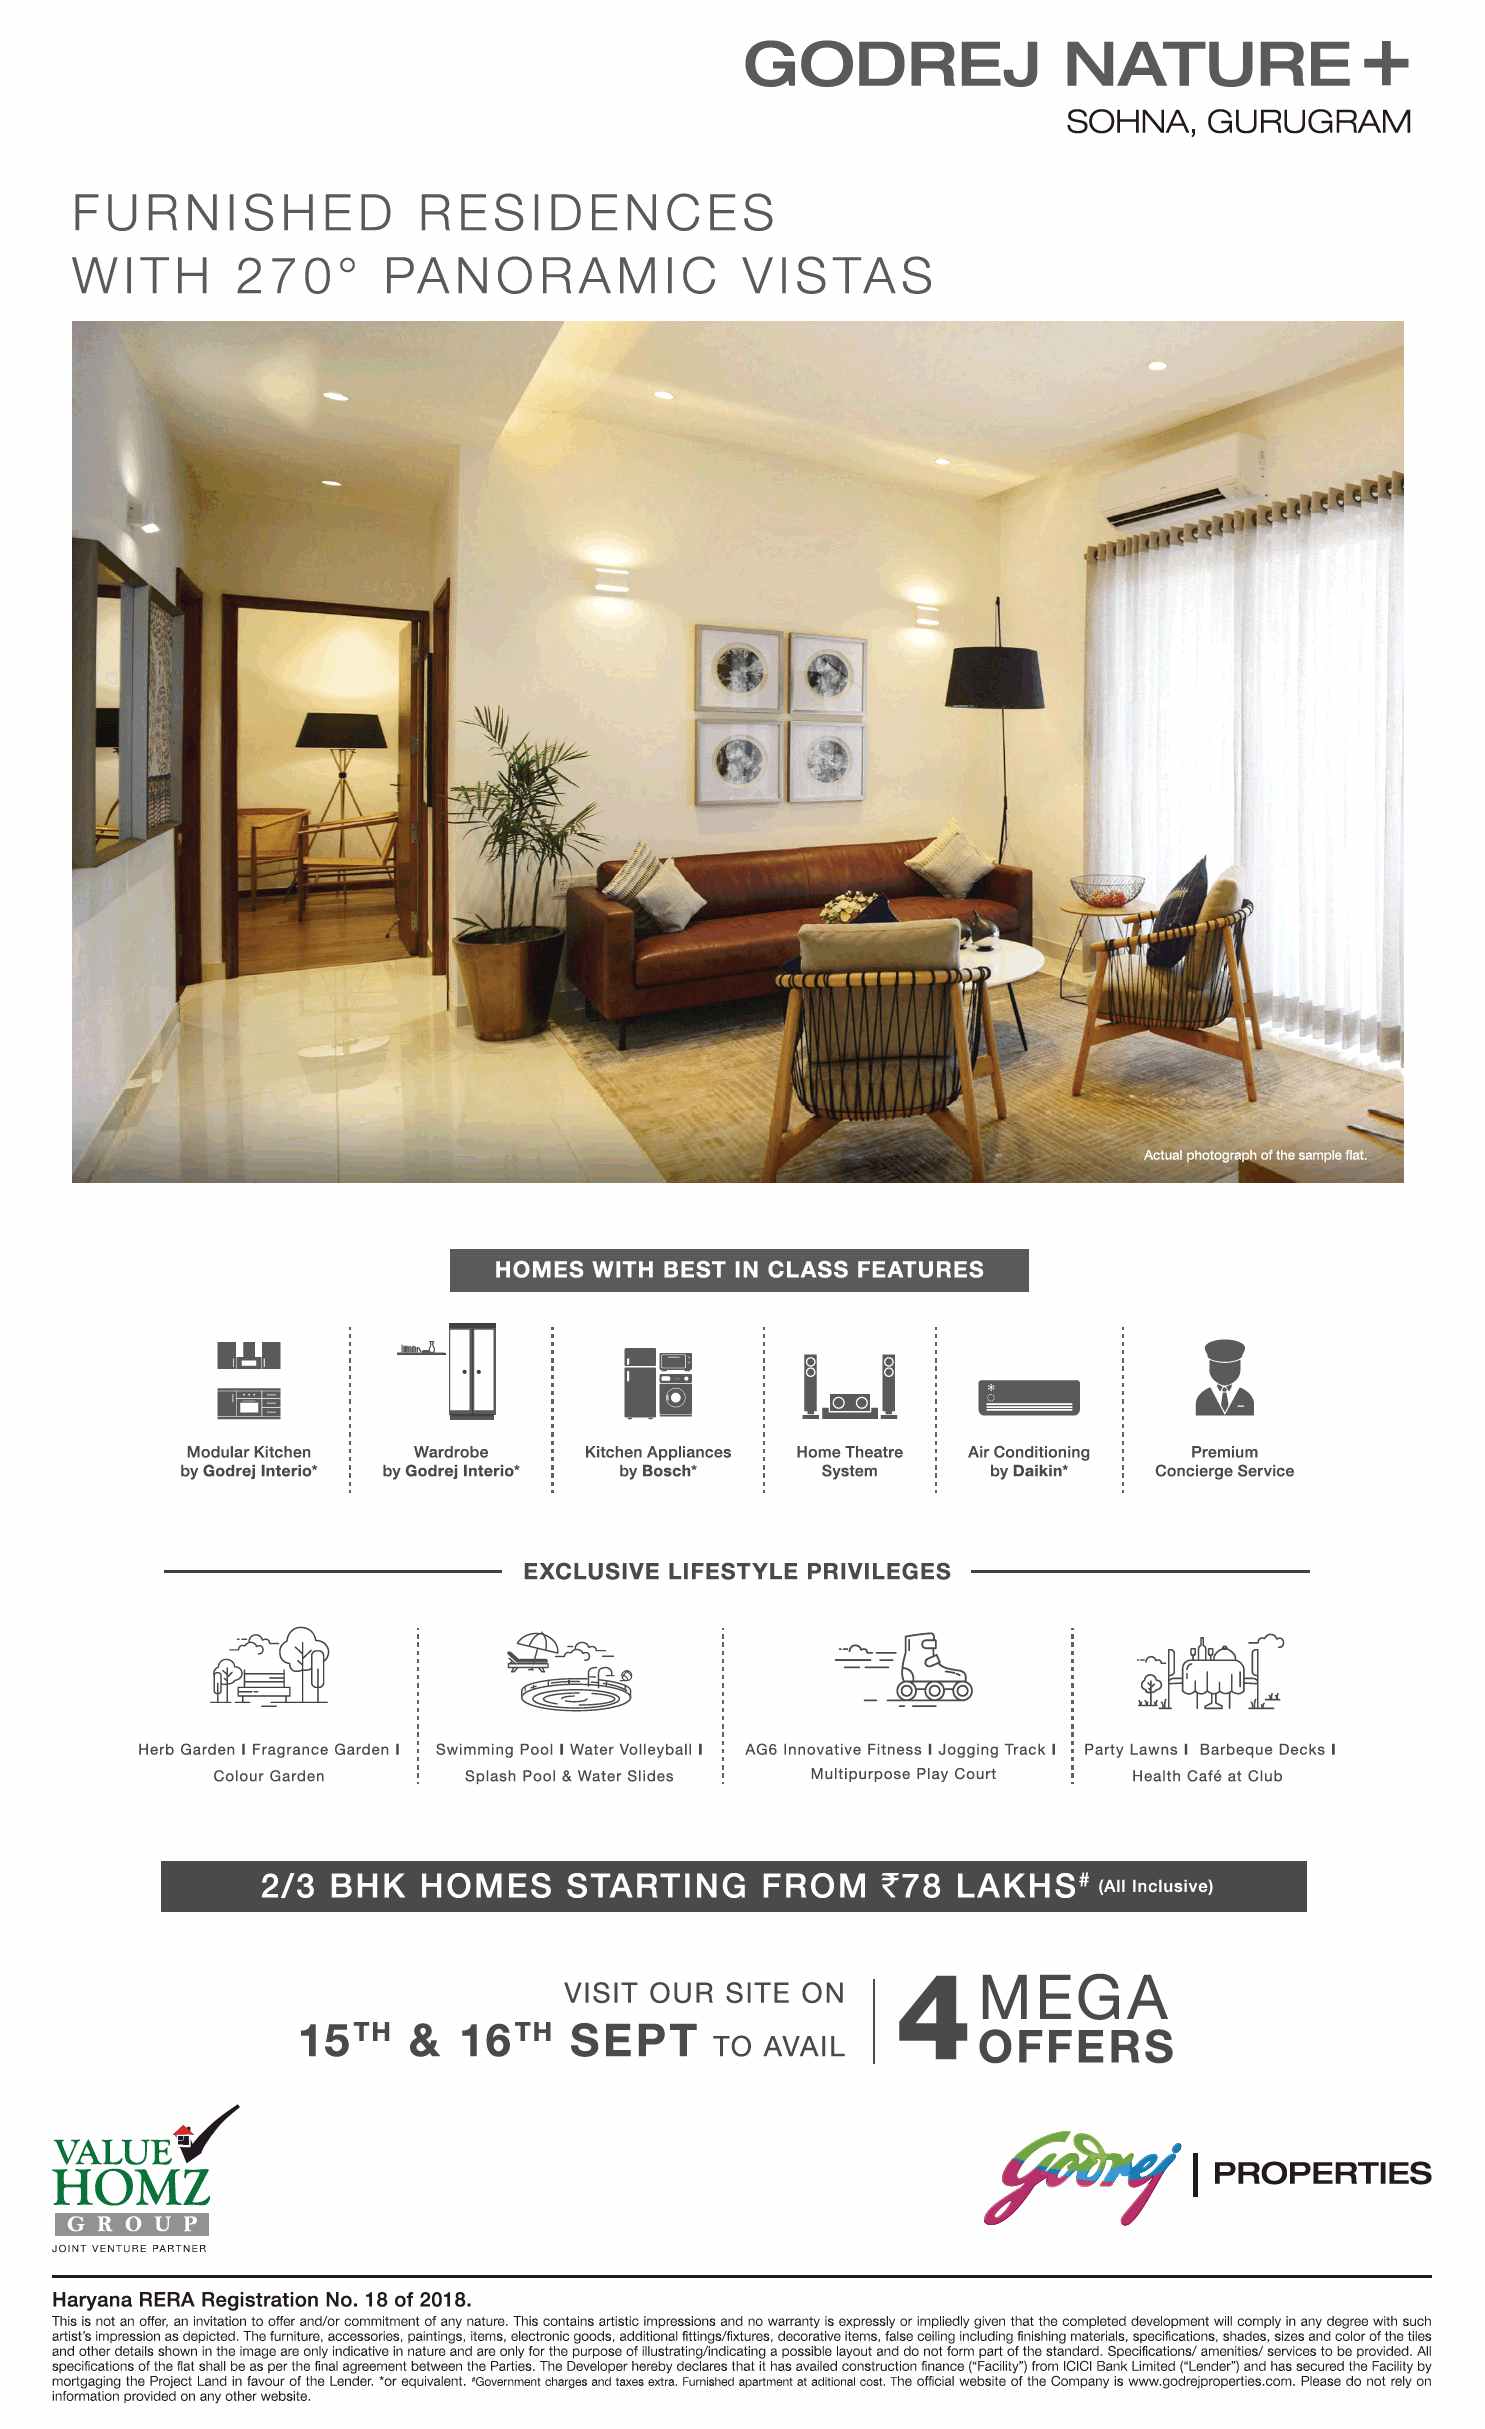 Presenting furnished residences with 270 degree panoramic vistas at Godrej Nature Plus in Sohna Update